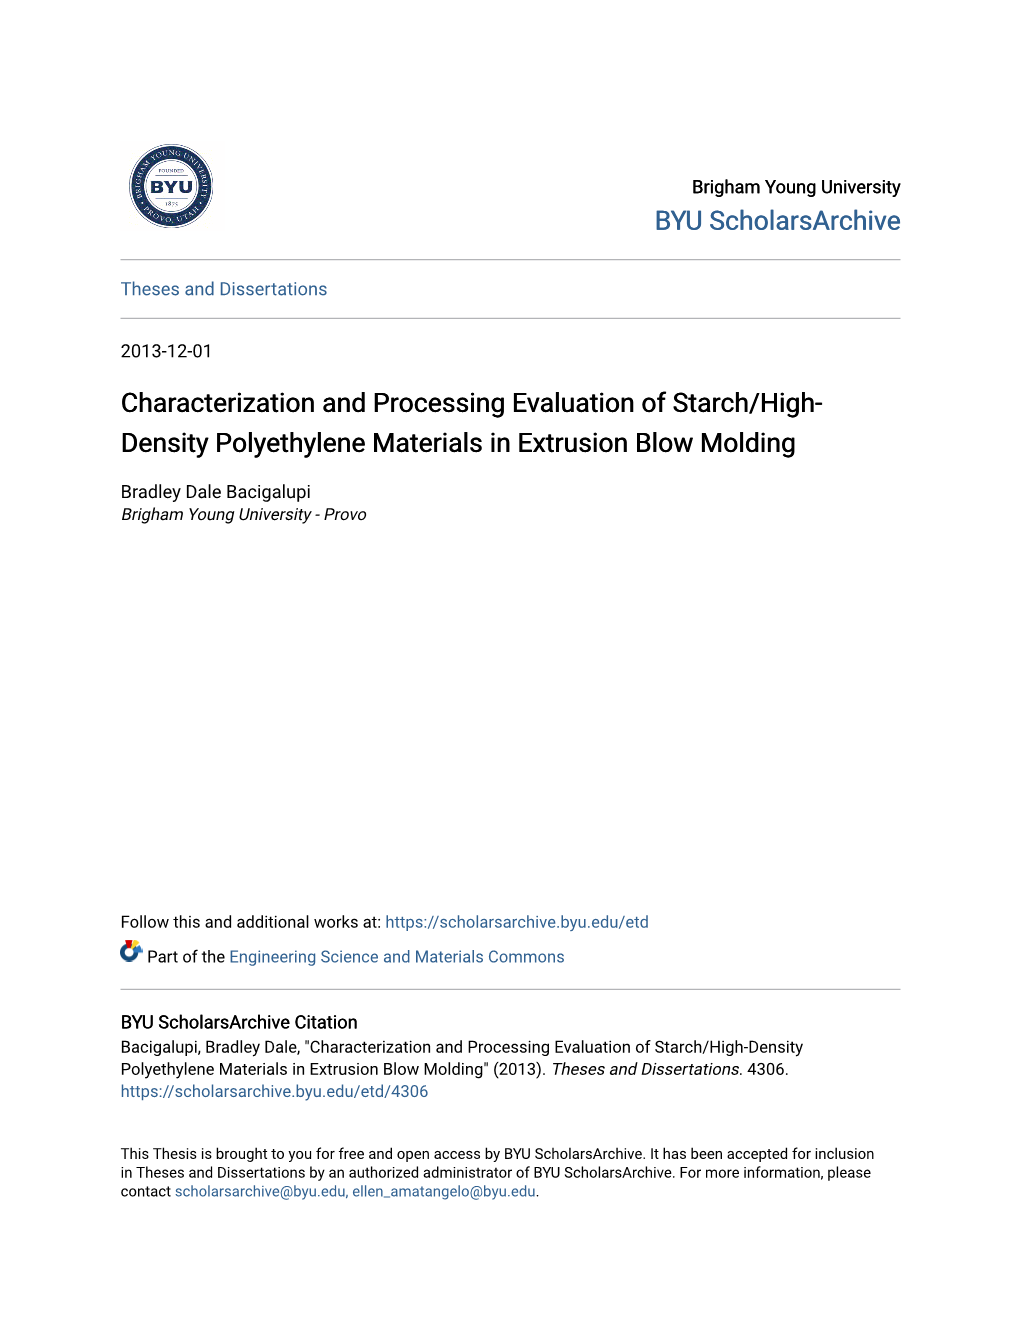 Characterization and Processing Evaluation of Starch/High-Density Polyethylene Materials in Extrusion Blow Molding" (2013)